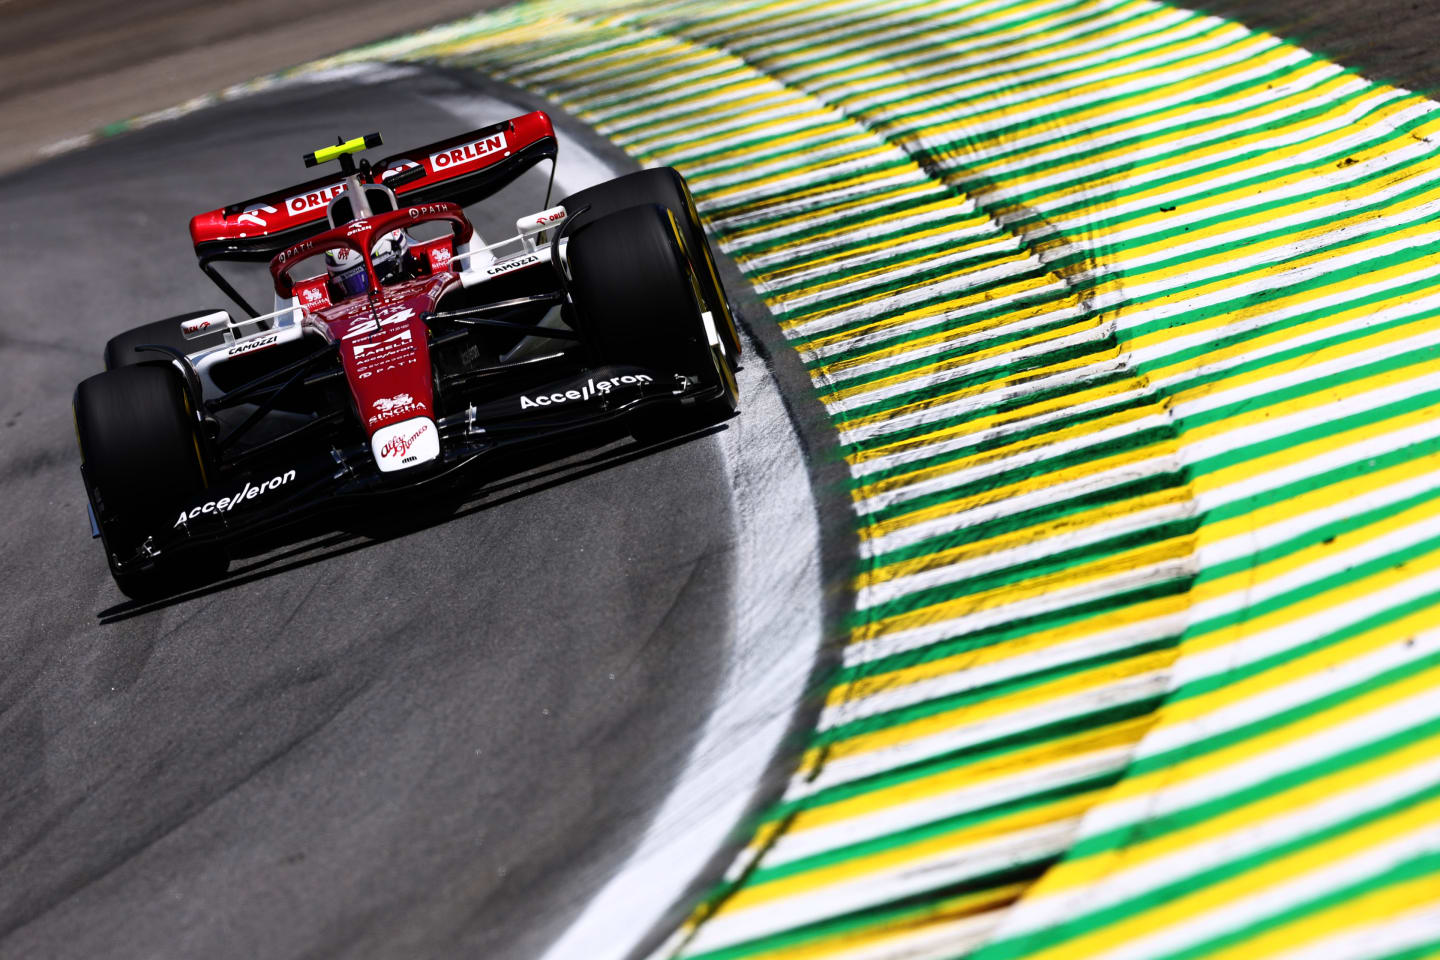 SAO PAULO, BRAZIL - NOVEMBER 12: Zhou Guanyu of China driving the (24) Alfa Romeo F1 C42 Ferrari on track during practice ahead of the F1 Grand Prix of Brazil at Autodromo Jose Carlos Pace on November 12, 2022 in Sao Paulo, Brazil. (Photo by Mark Thompson/Getty Images)